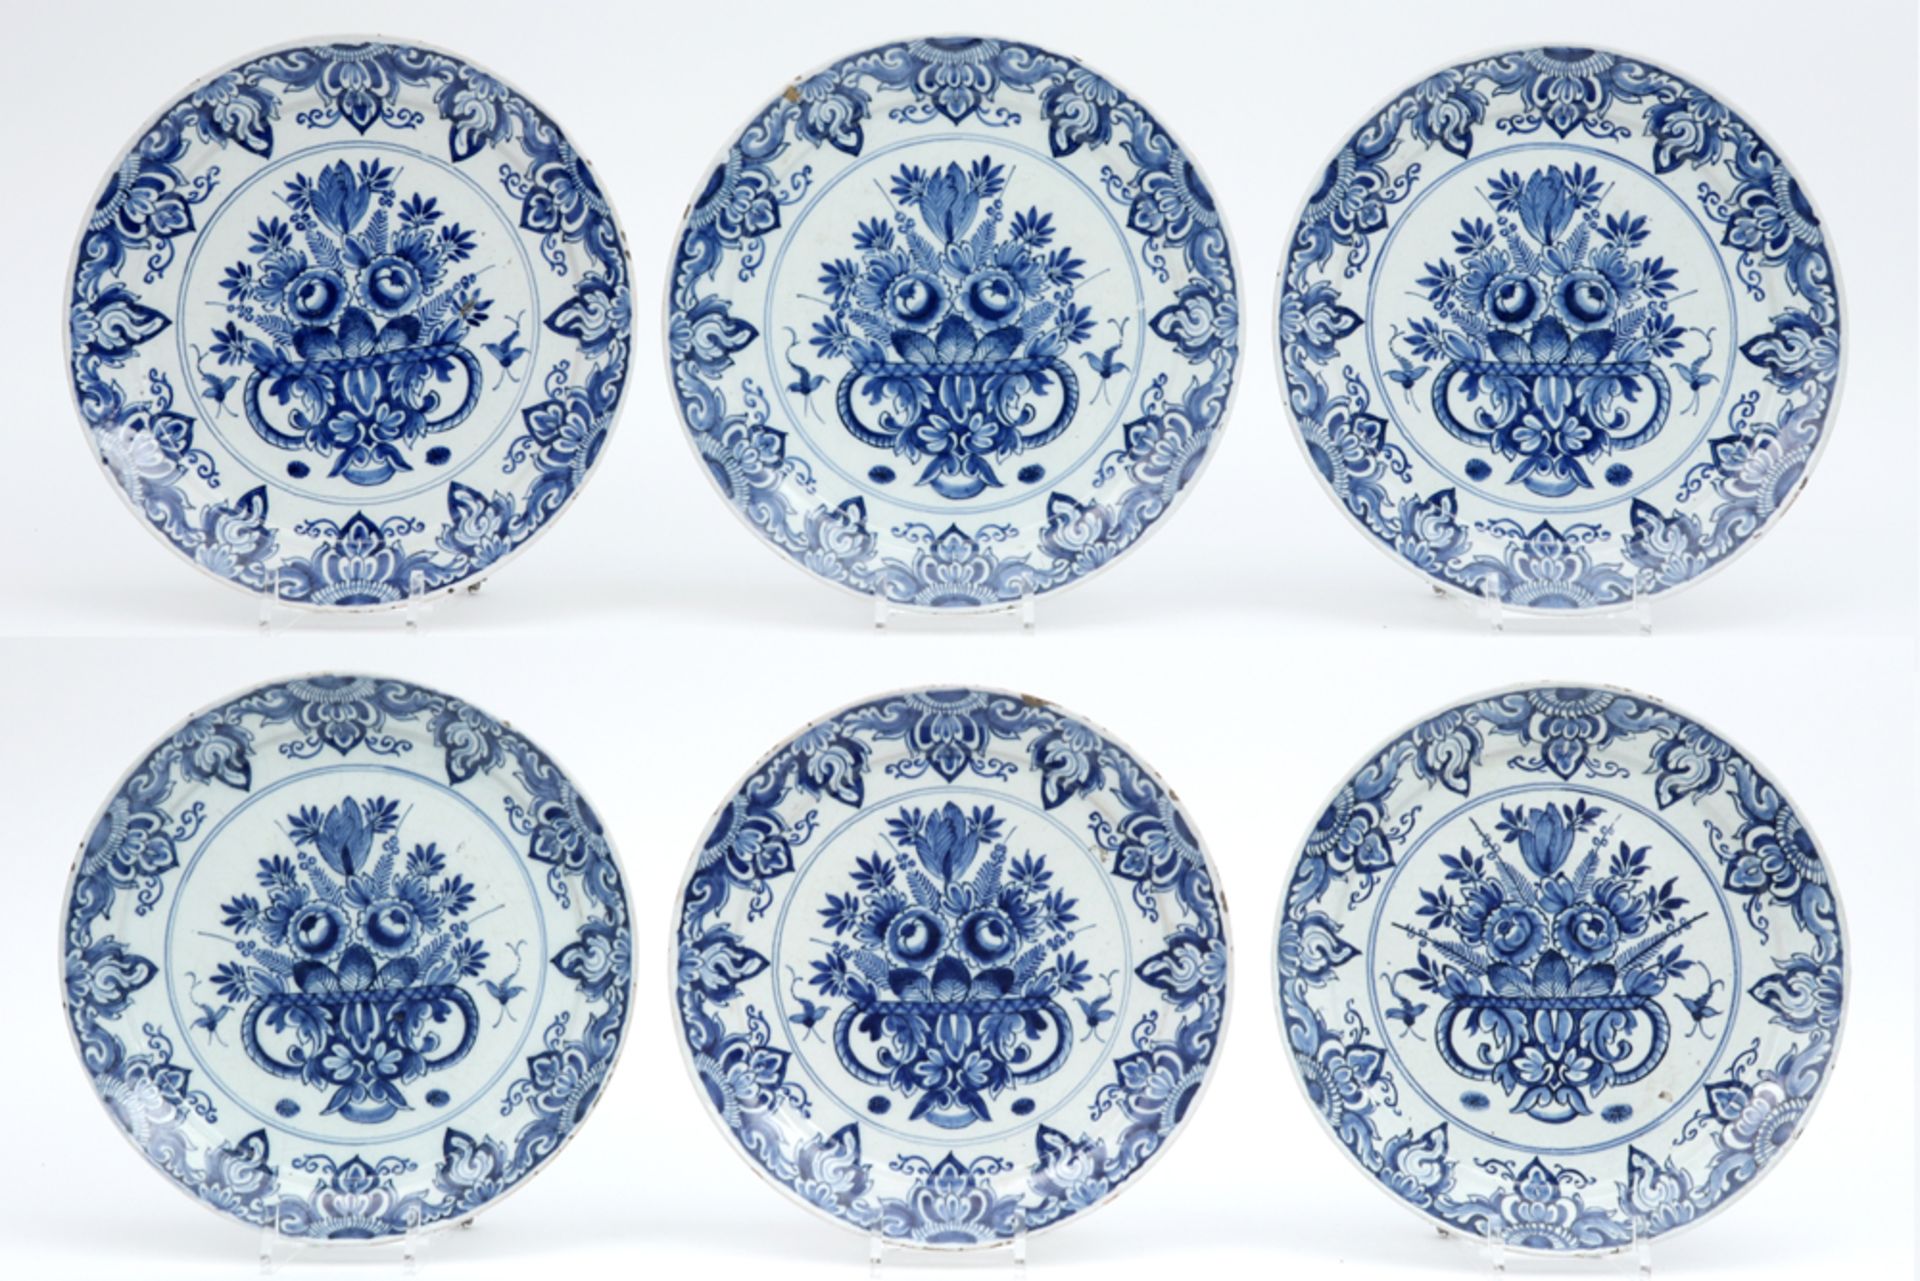 set of six 18th Cent. plates in ceramic from Delft with blue-white decor || Reeks van zes achttiende